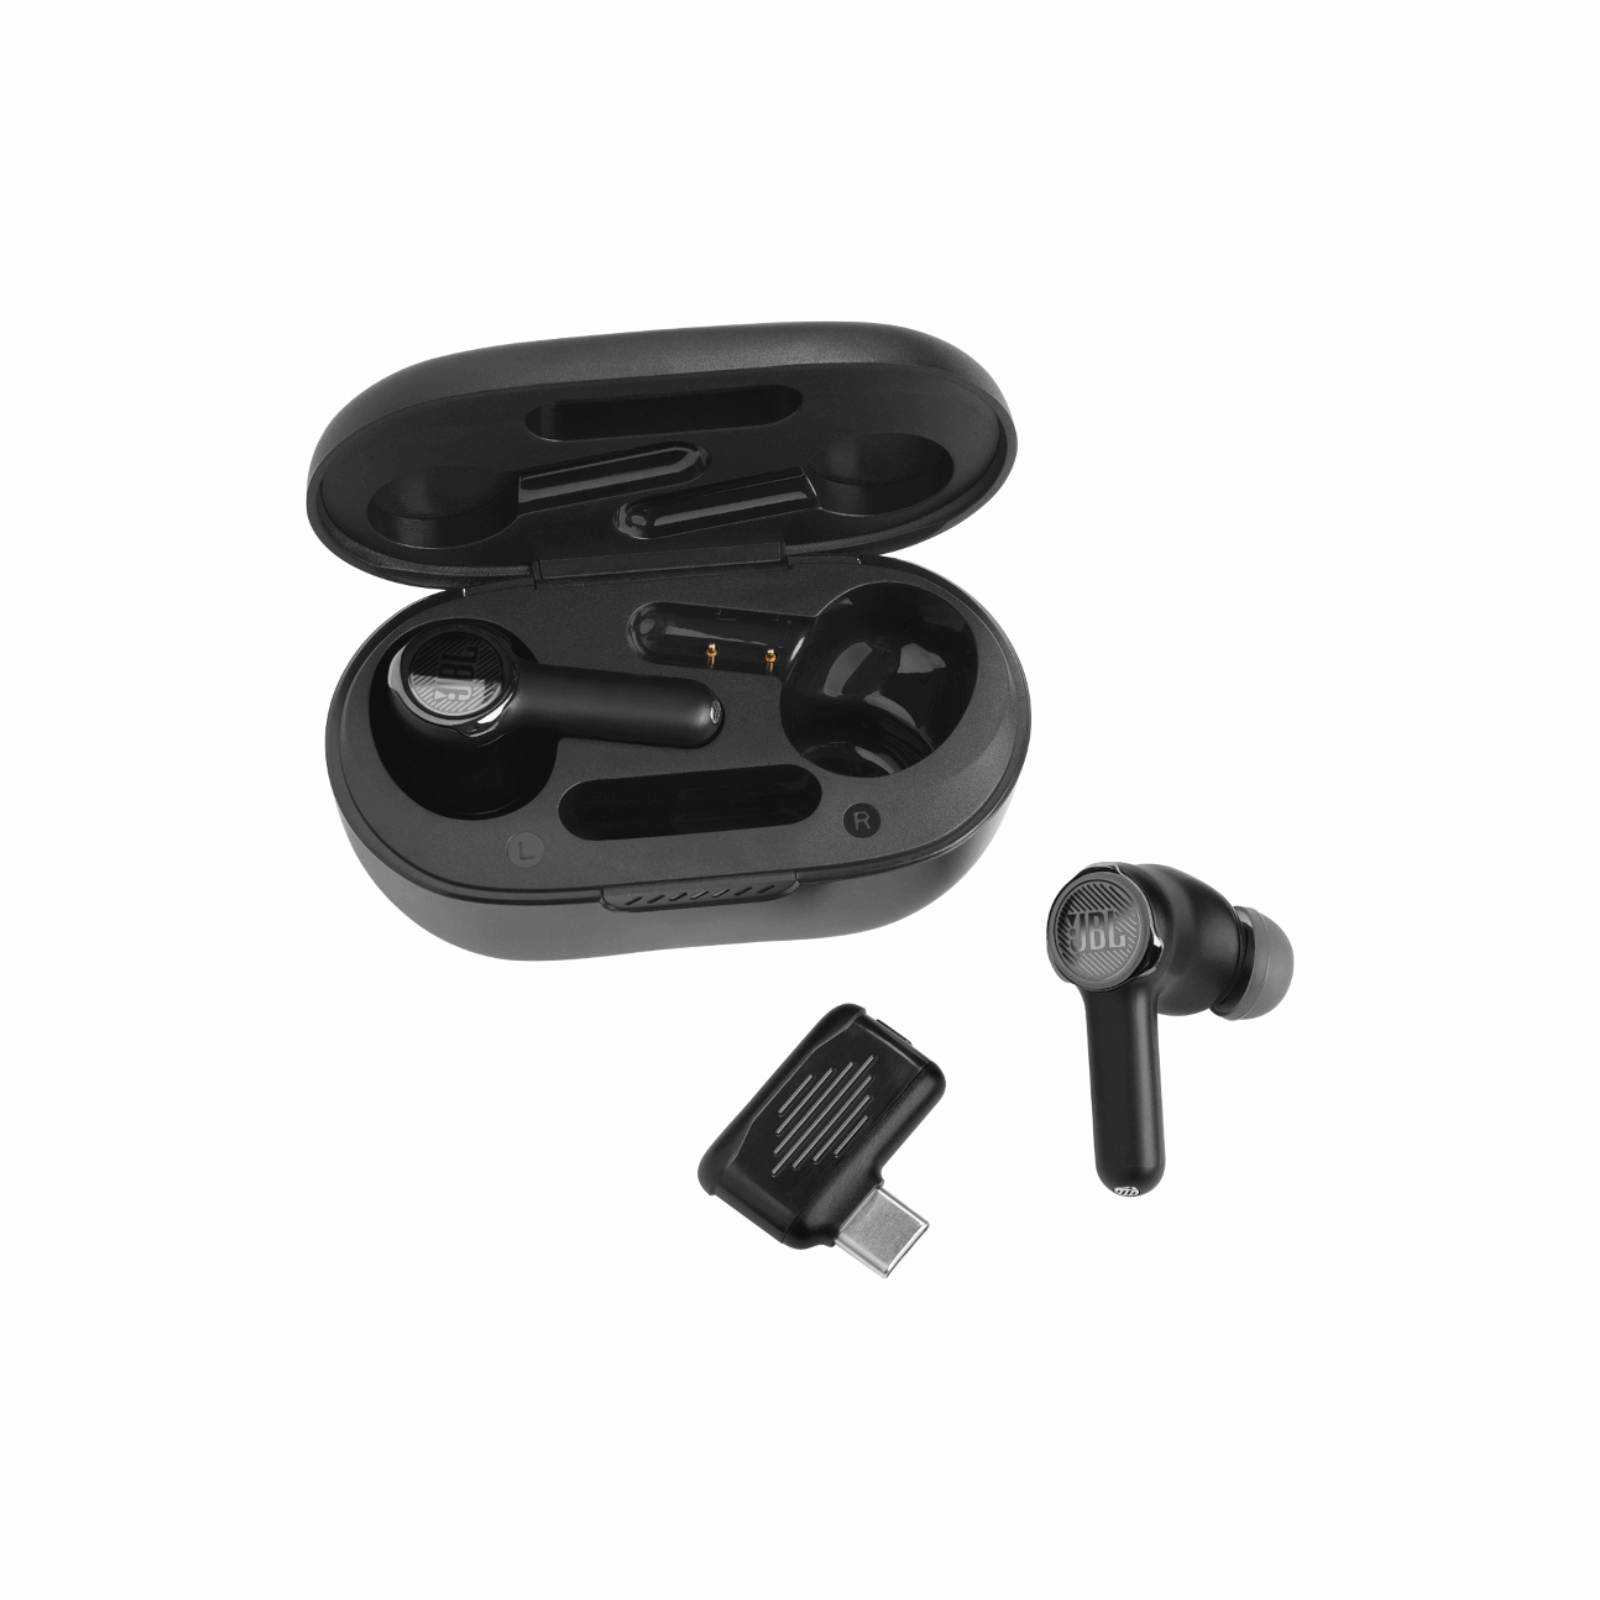 JBL Quantum TWS True wireless Noise Cancelling gaming earbuds